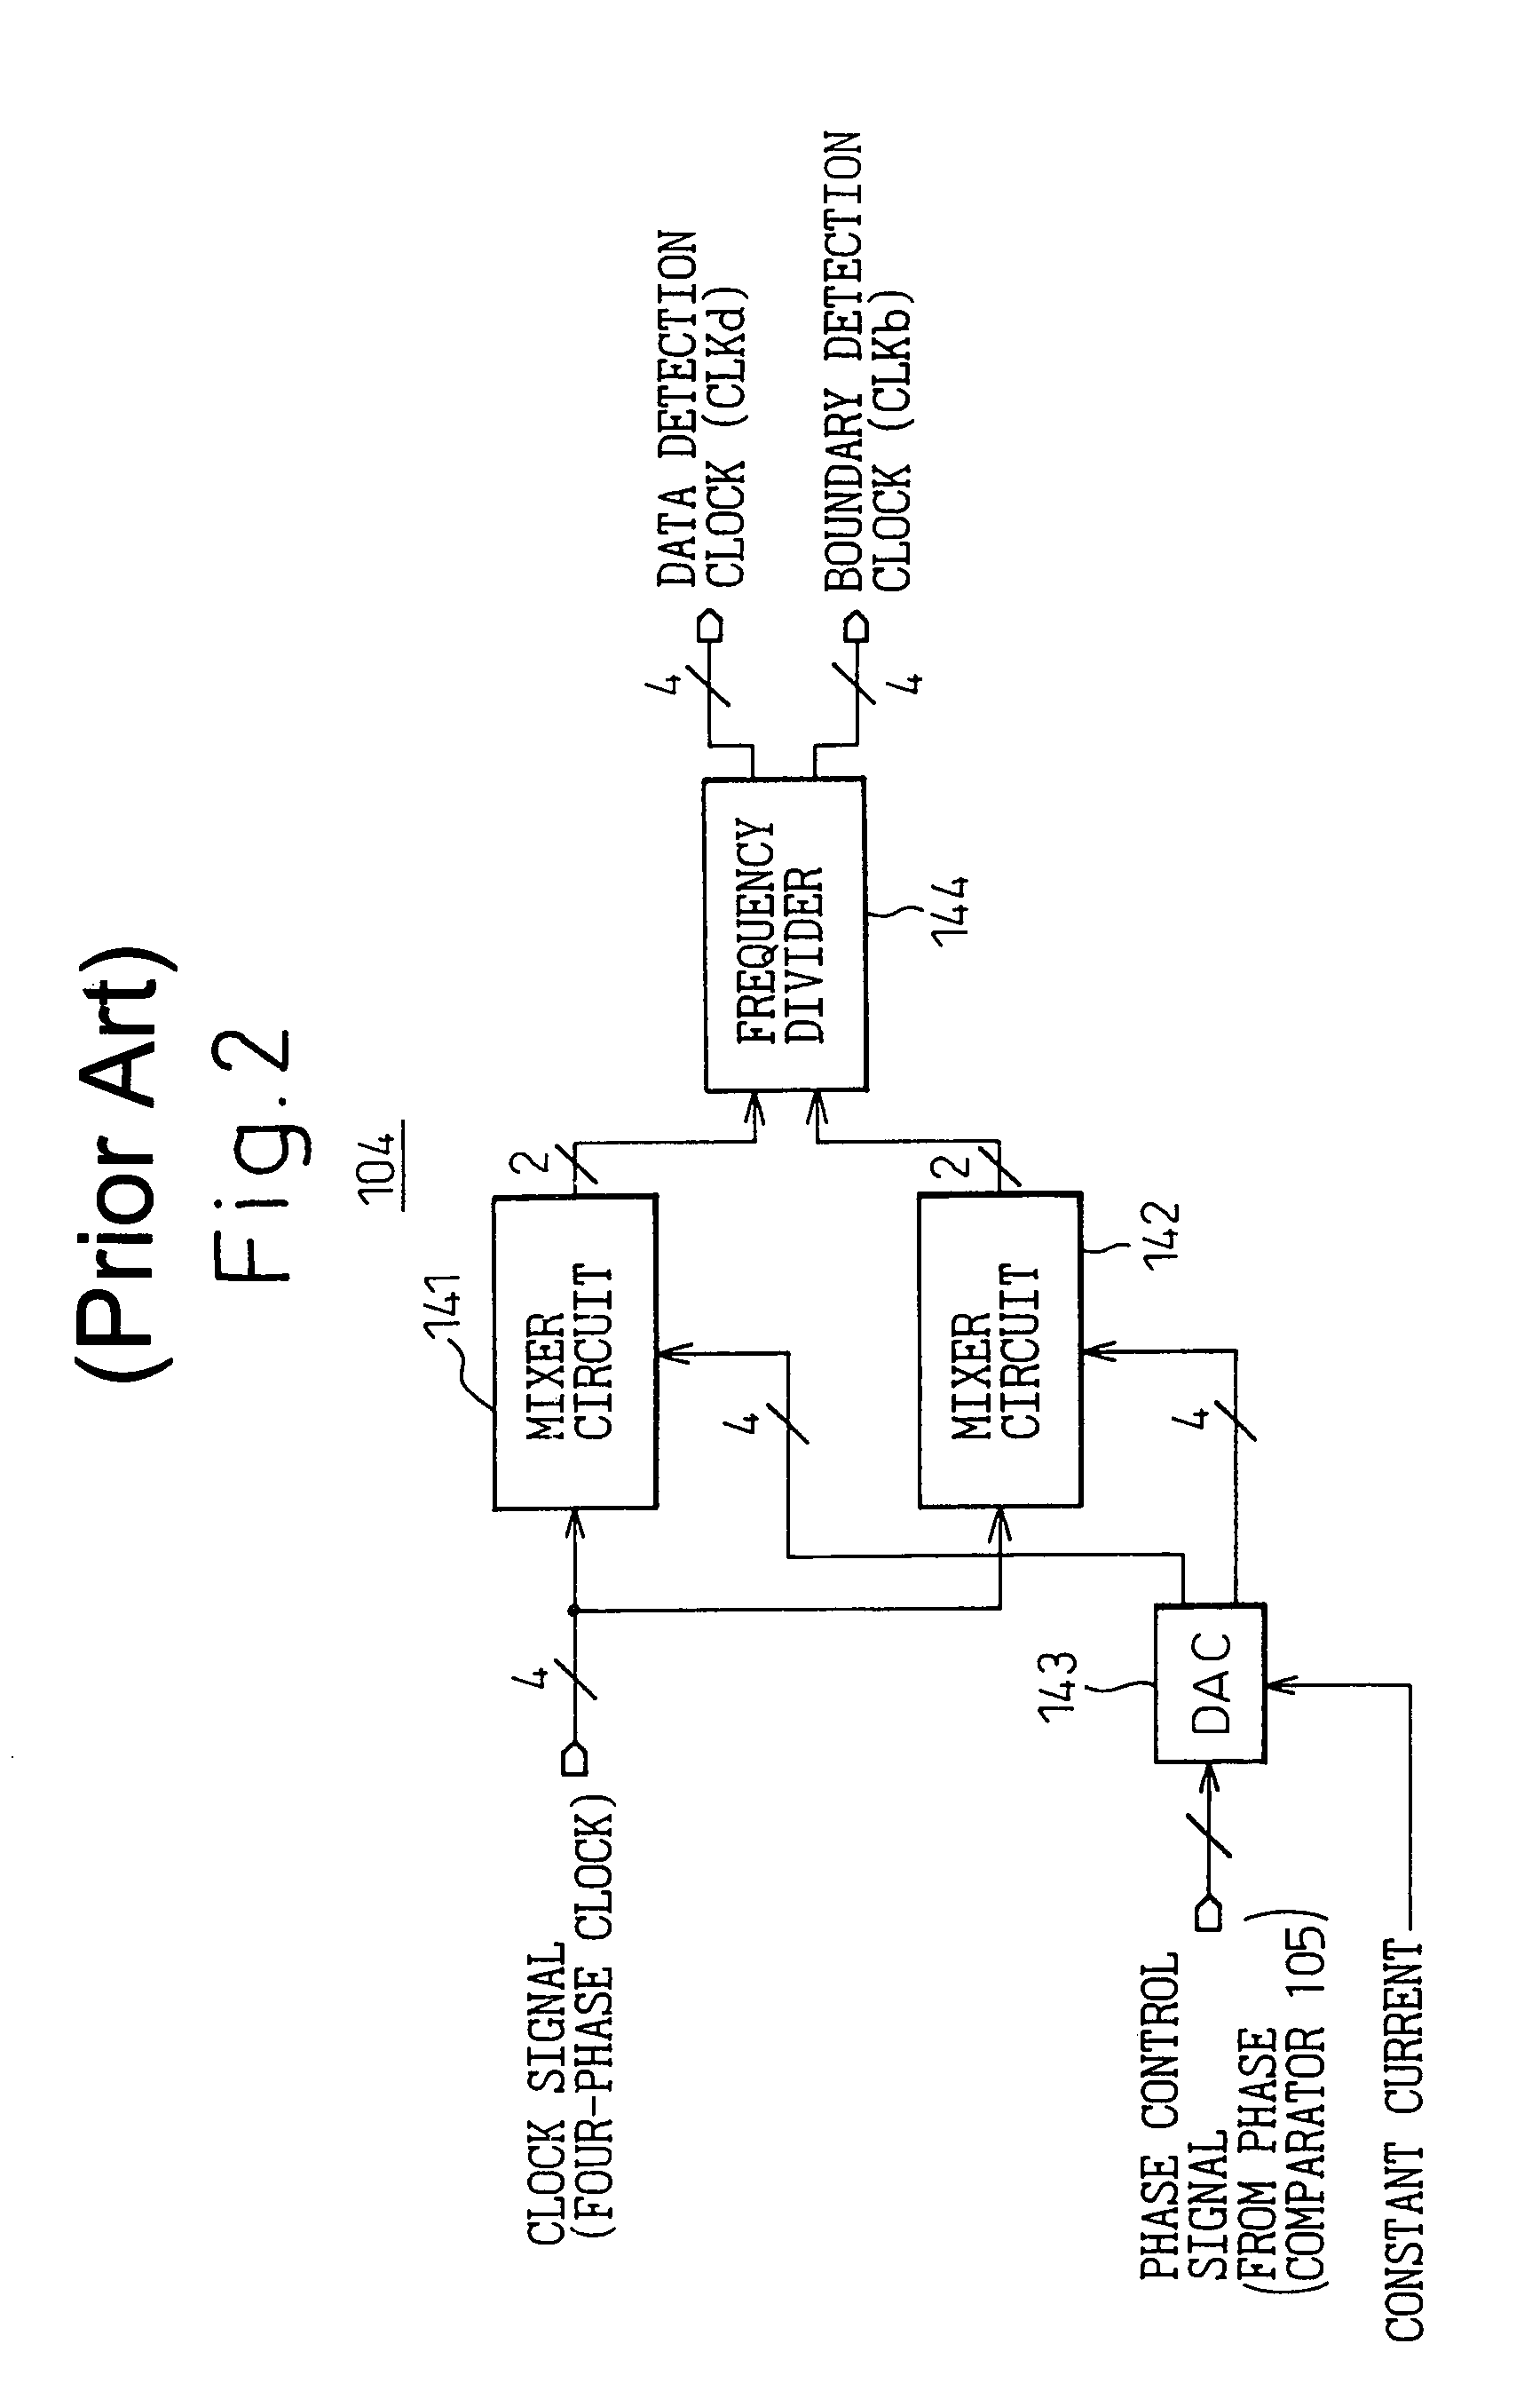 Clock recovery circuit and receiver circuit for improving the error rate of signal reproduction